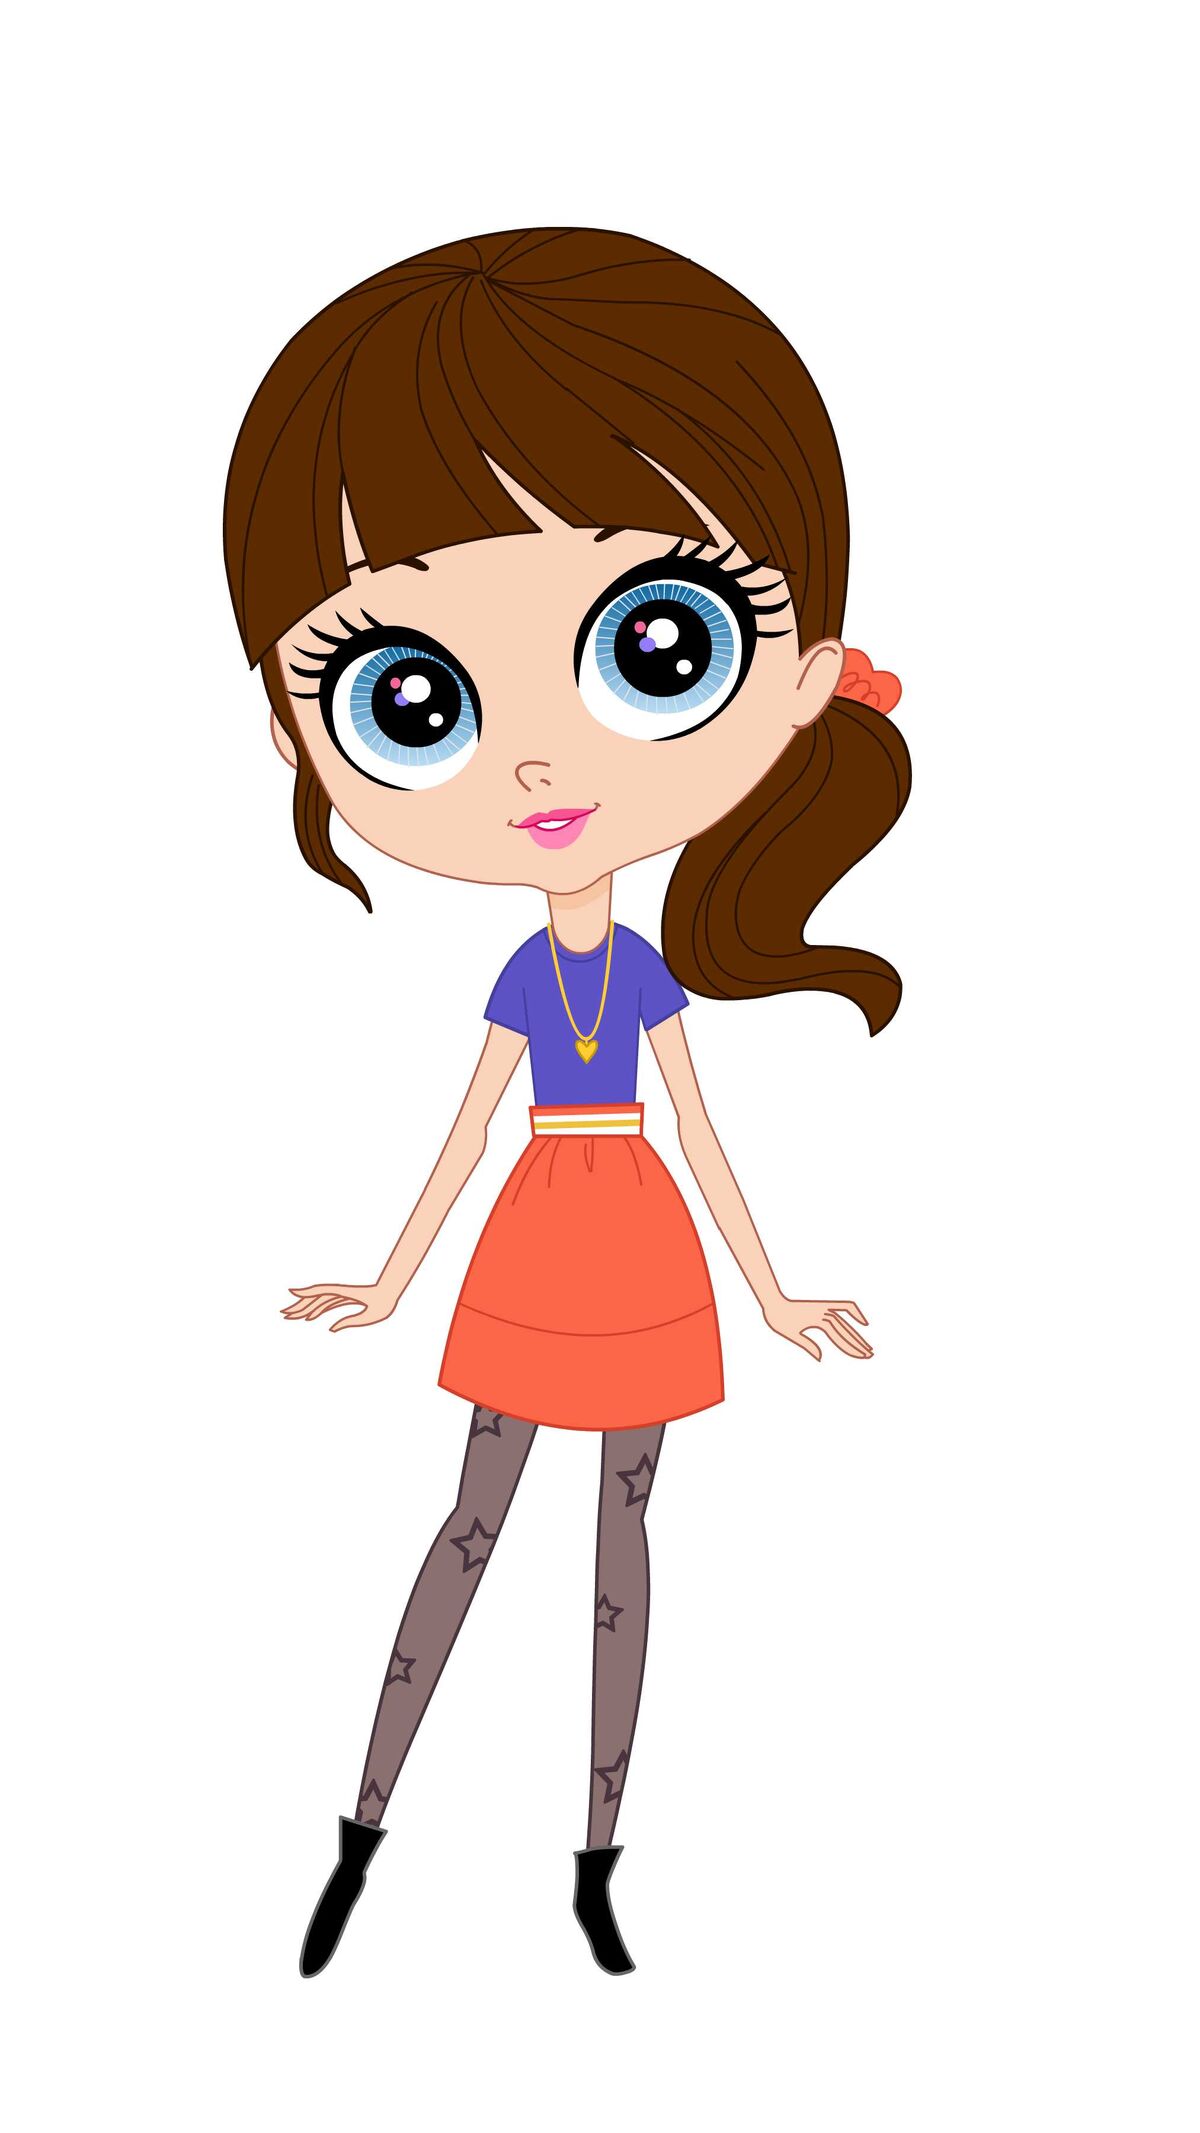 https://static.wikia.nocookie.net/littlestpetshop-the-show/images/8/87/Blythe_Baxter.jpg/revision/latest/scale-to-width-down/1200?cb=20121229024113